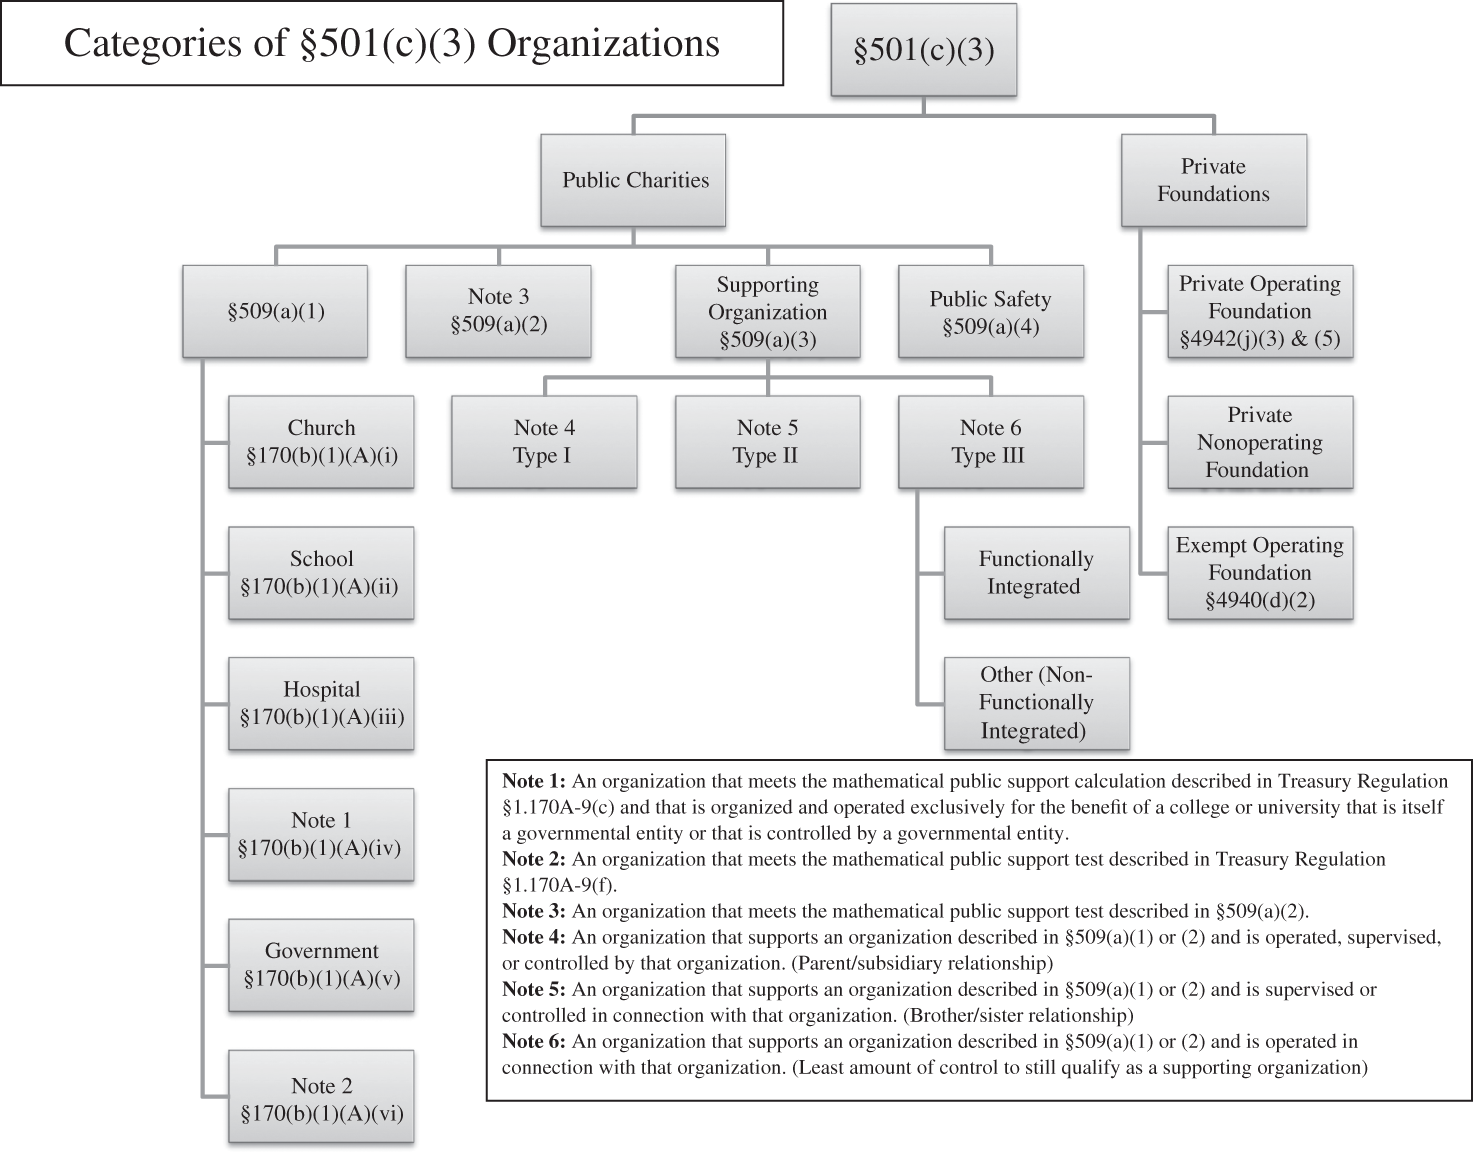 Illustration of the different categories of organizations exempt under §501(c)(3) presenting the comparison between public charities and private foundations.